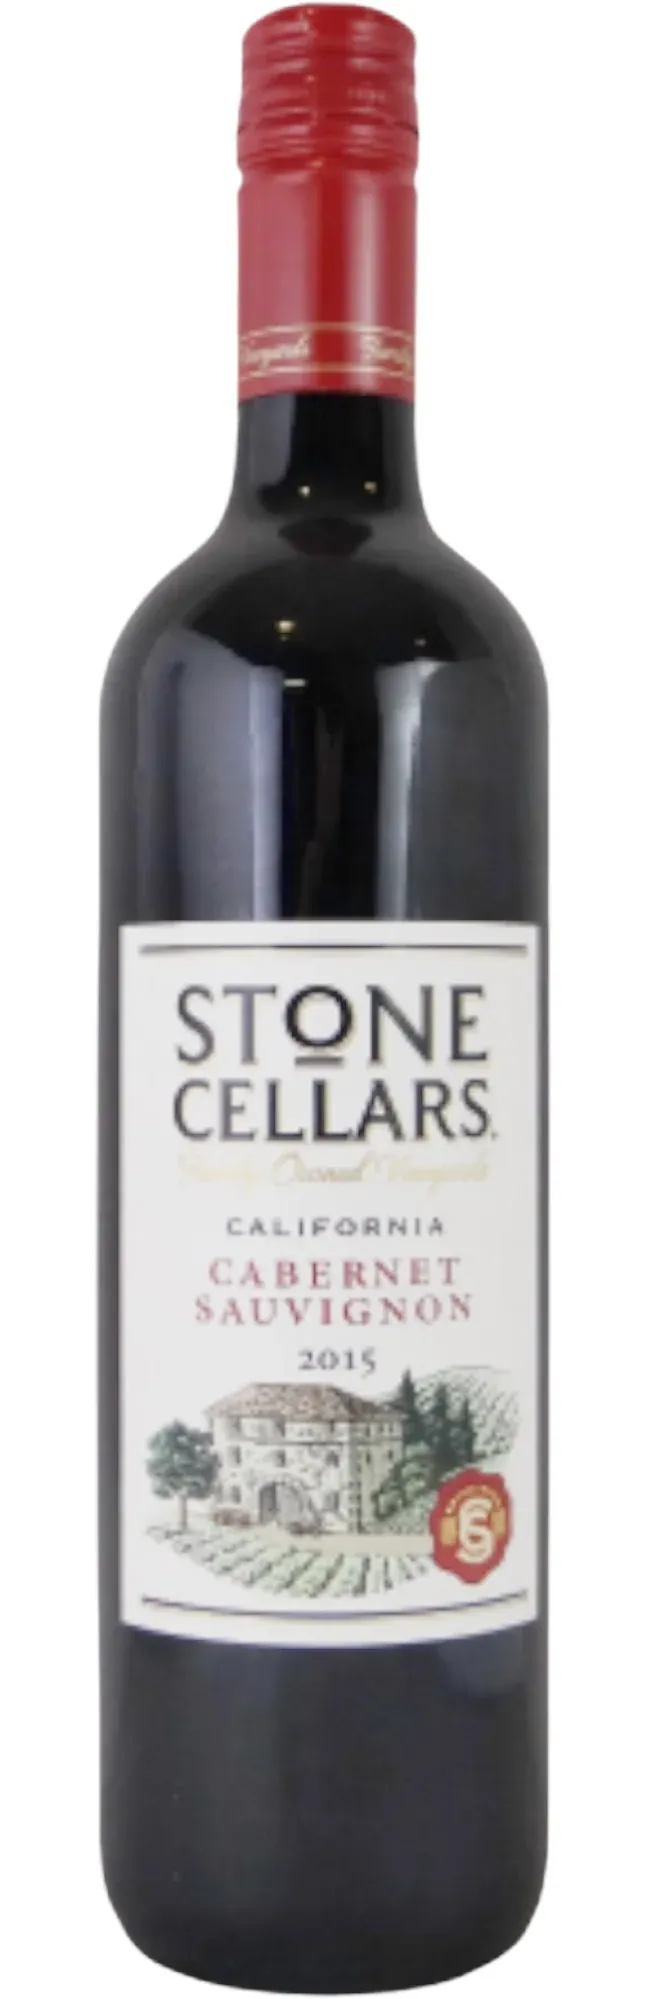 Bottle of One Stone Cellars Cabernet Sauvignonwith label visible